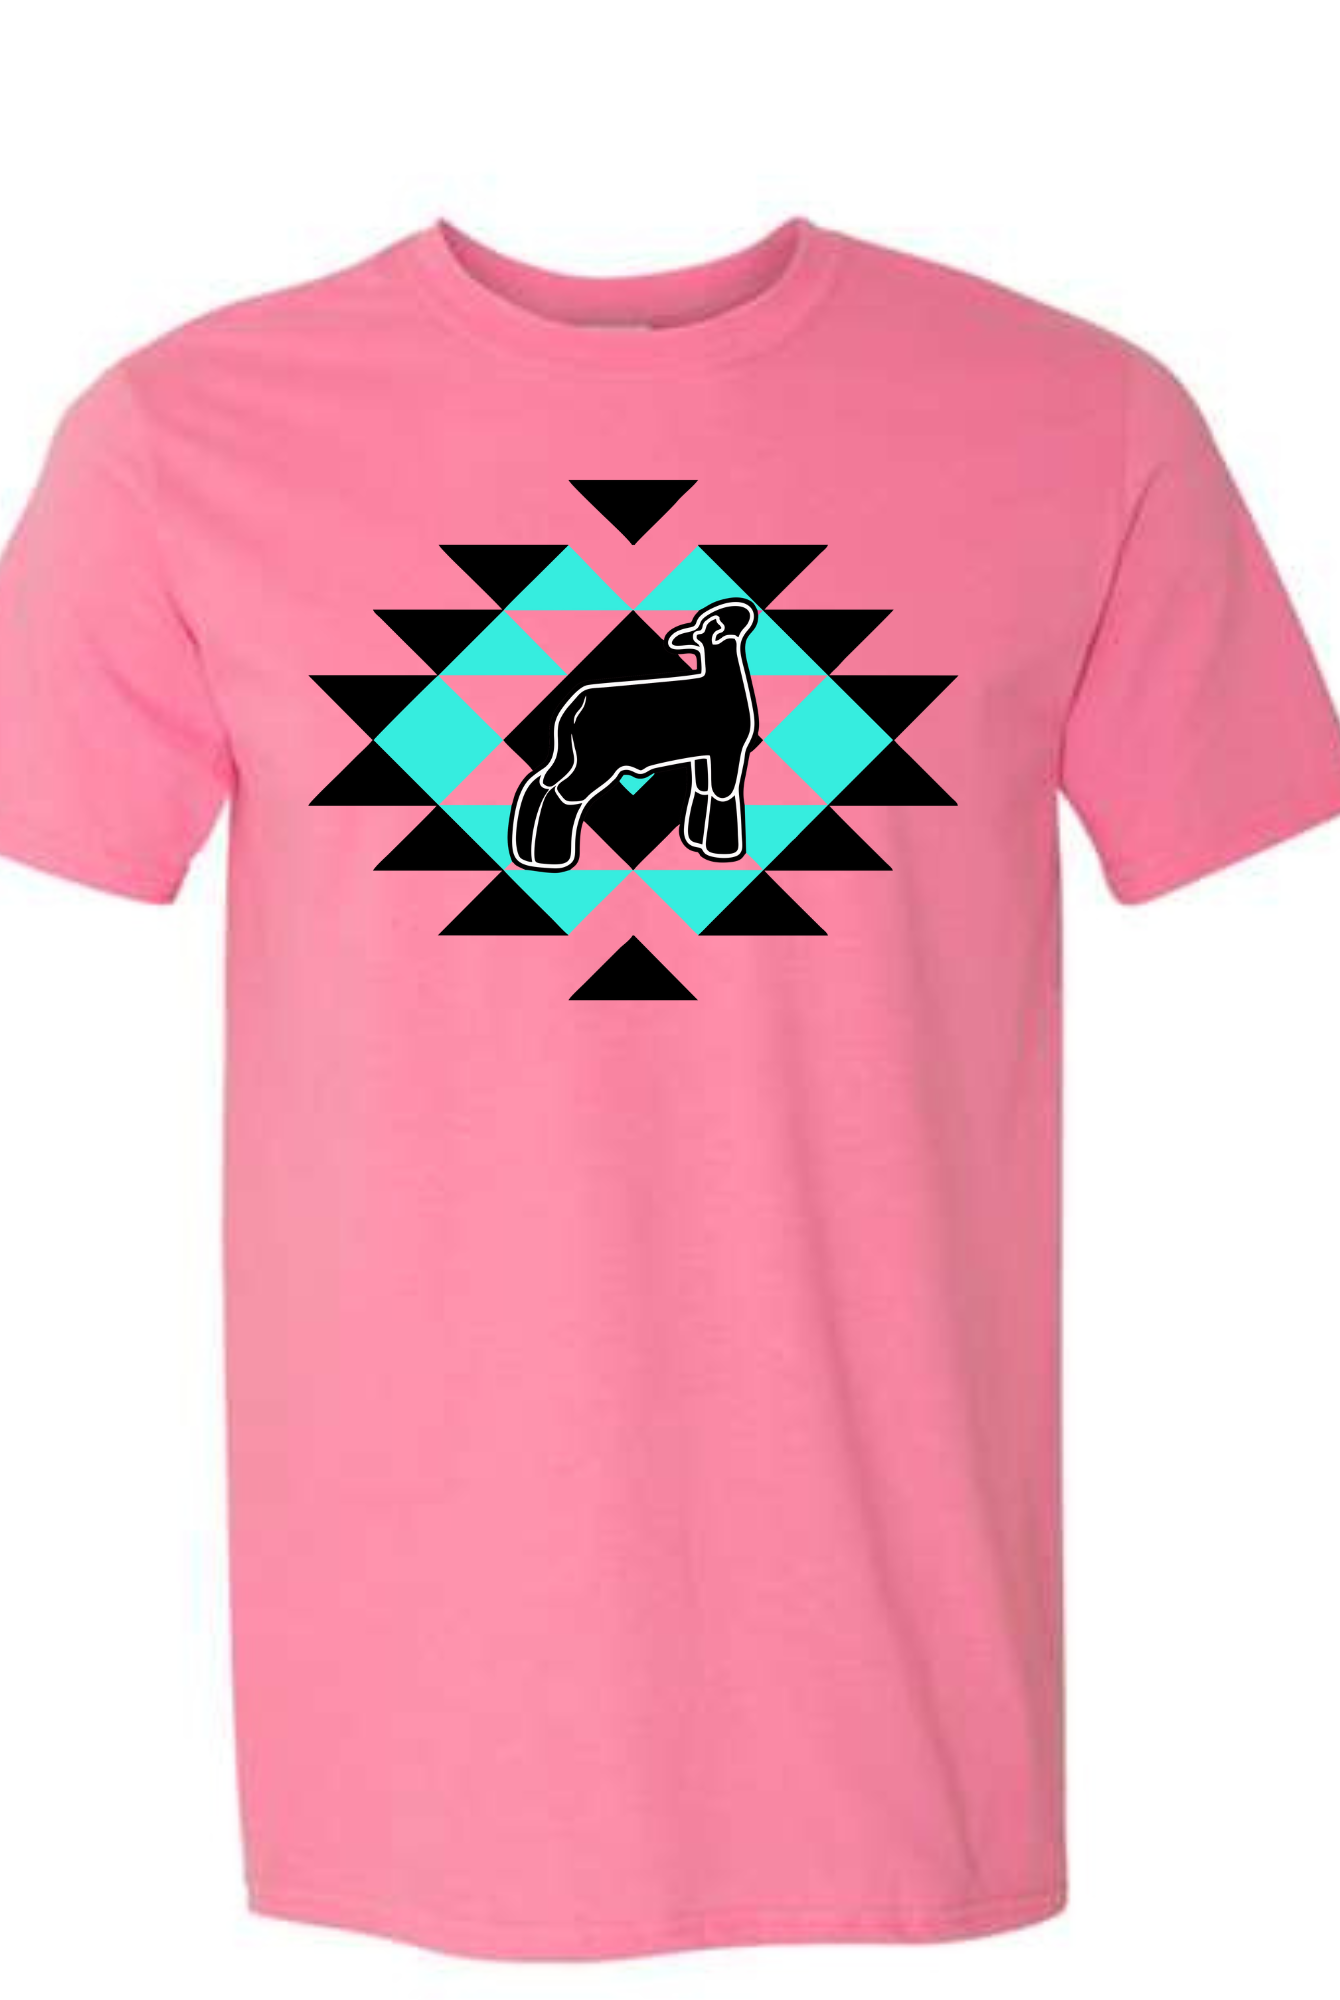 Pop Of Color Pick Your Passion Livestock Graphic Tee-Graphic Tees-Deadwood South Boutique & Company-Deadwood South Boutique, Women's Fashion Boutique in Henderson, TX